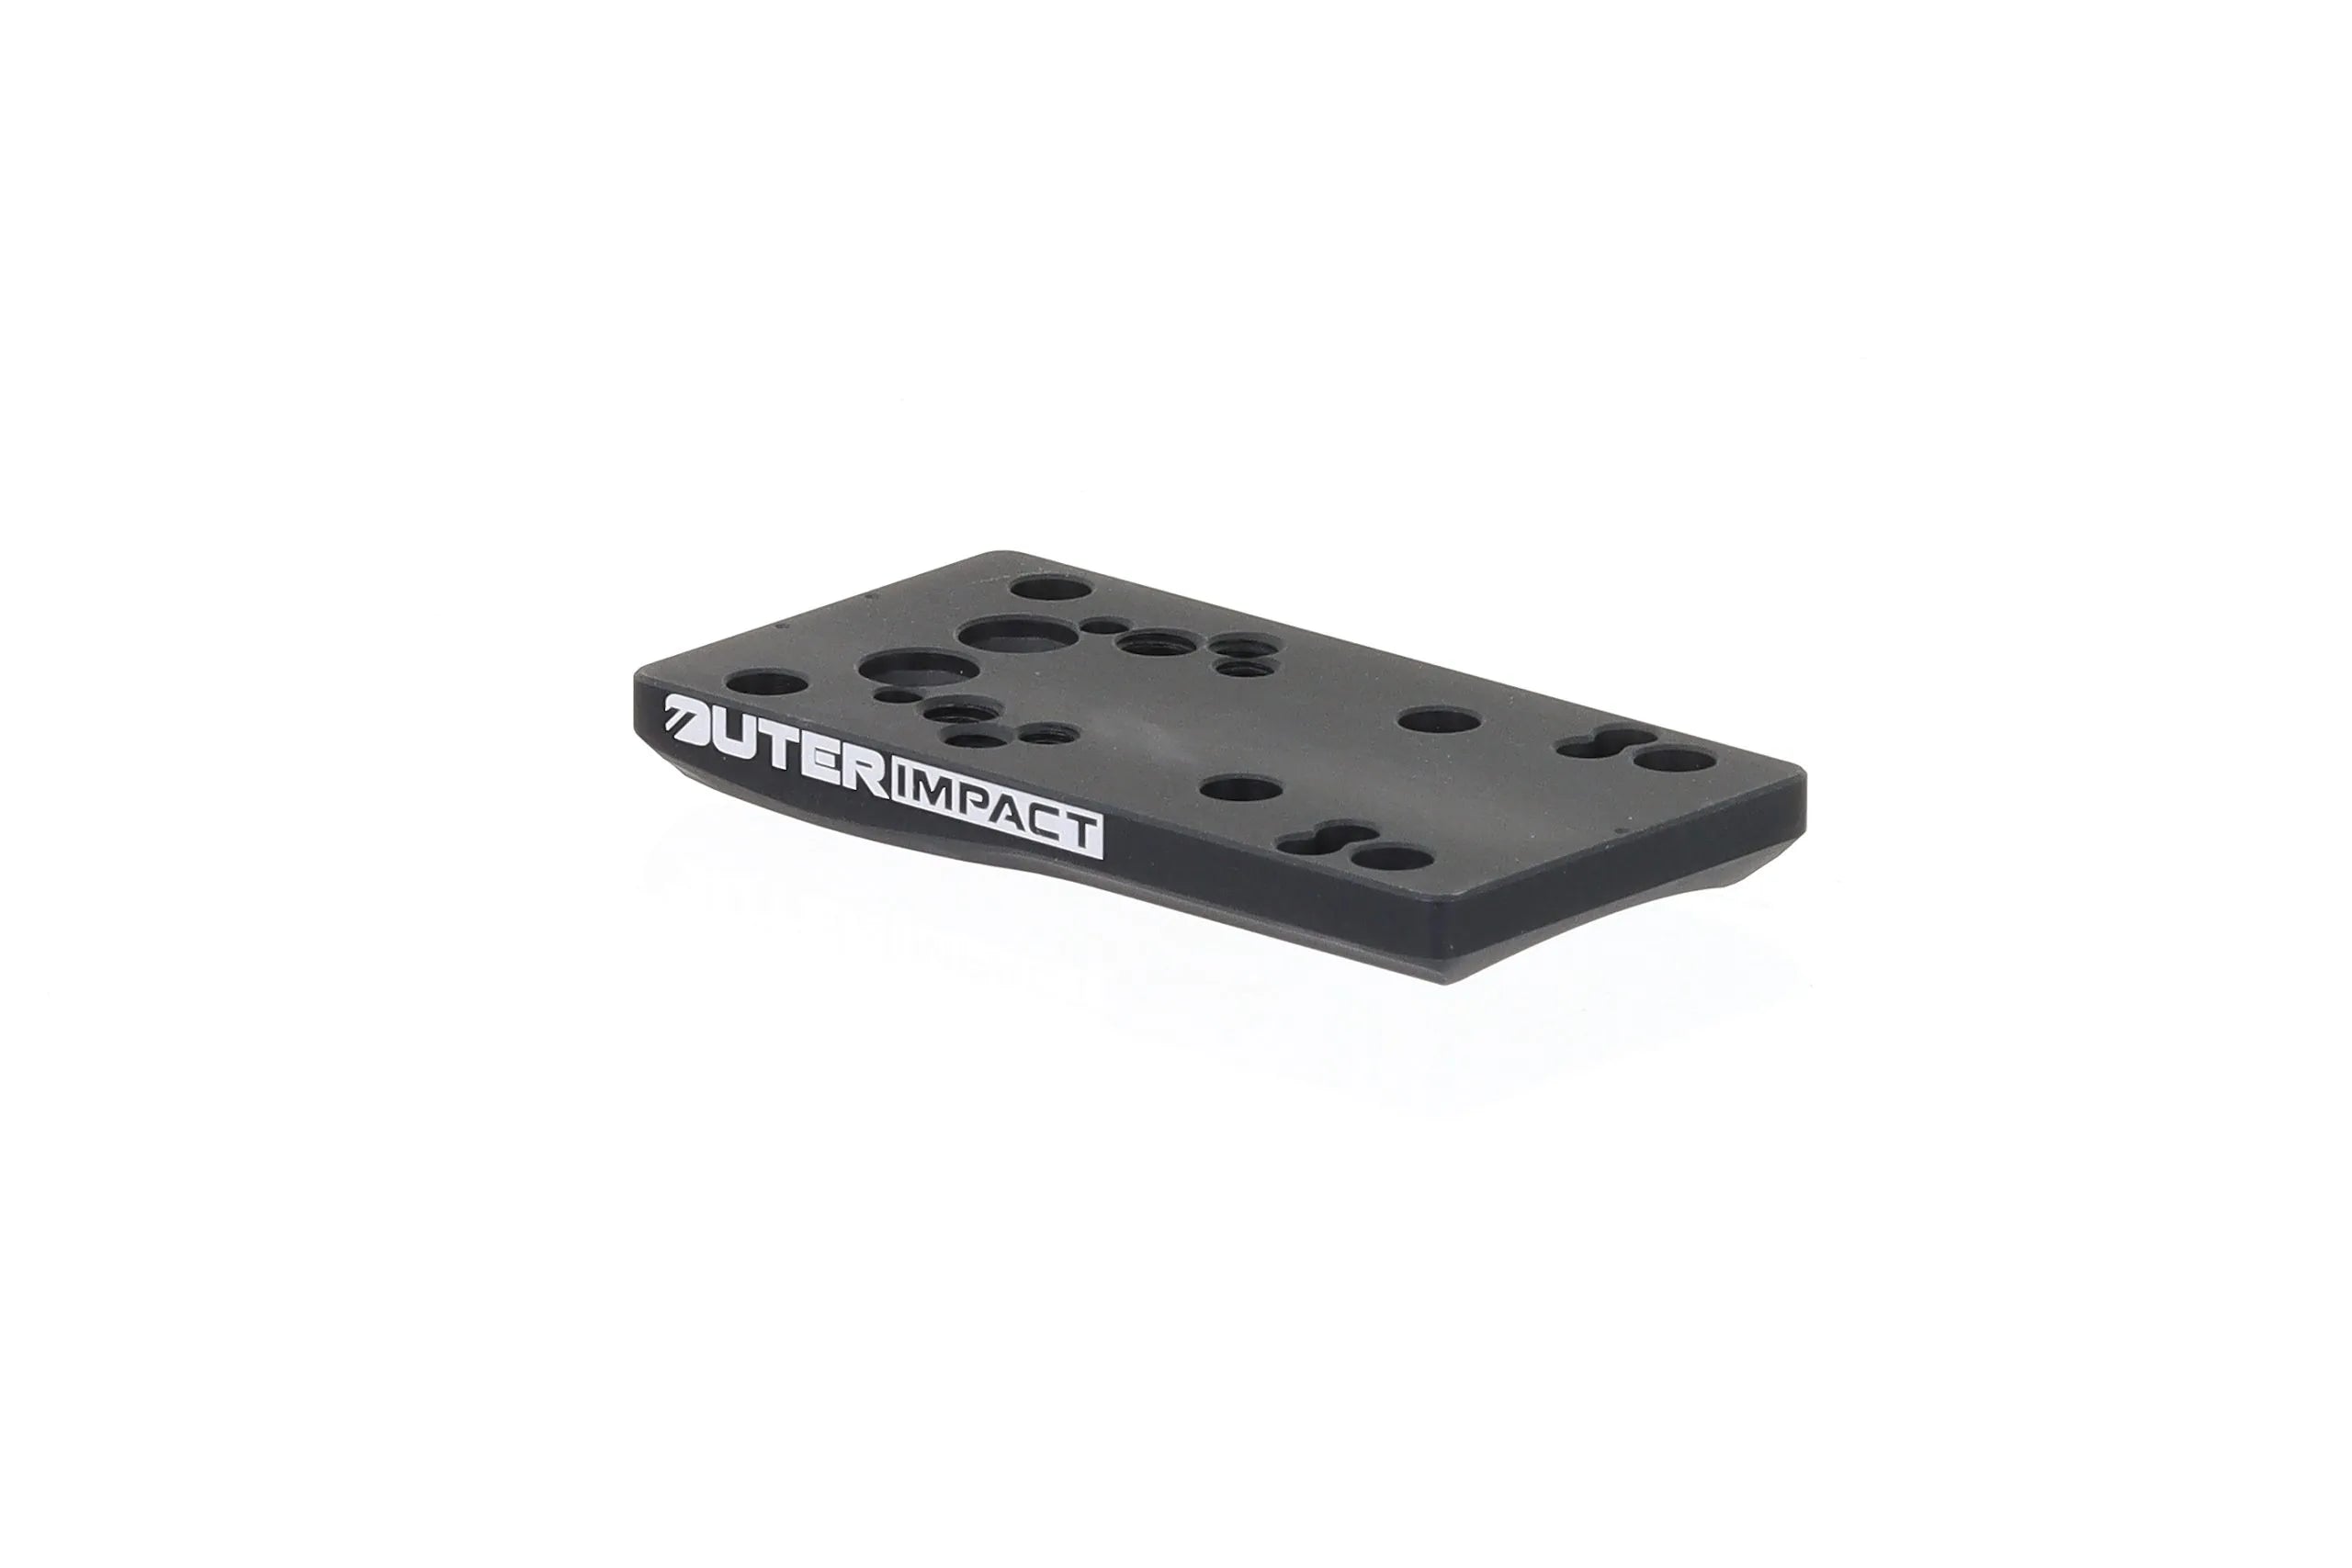 CZ P-09 Pistol Red Dot Adapter Mount Plate - OuterImpact